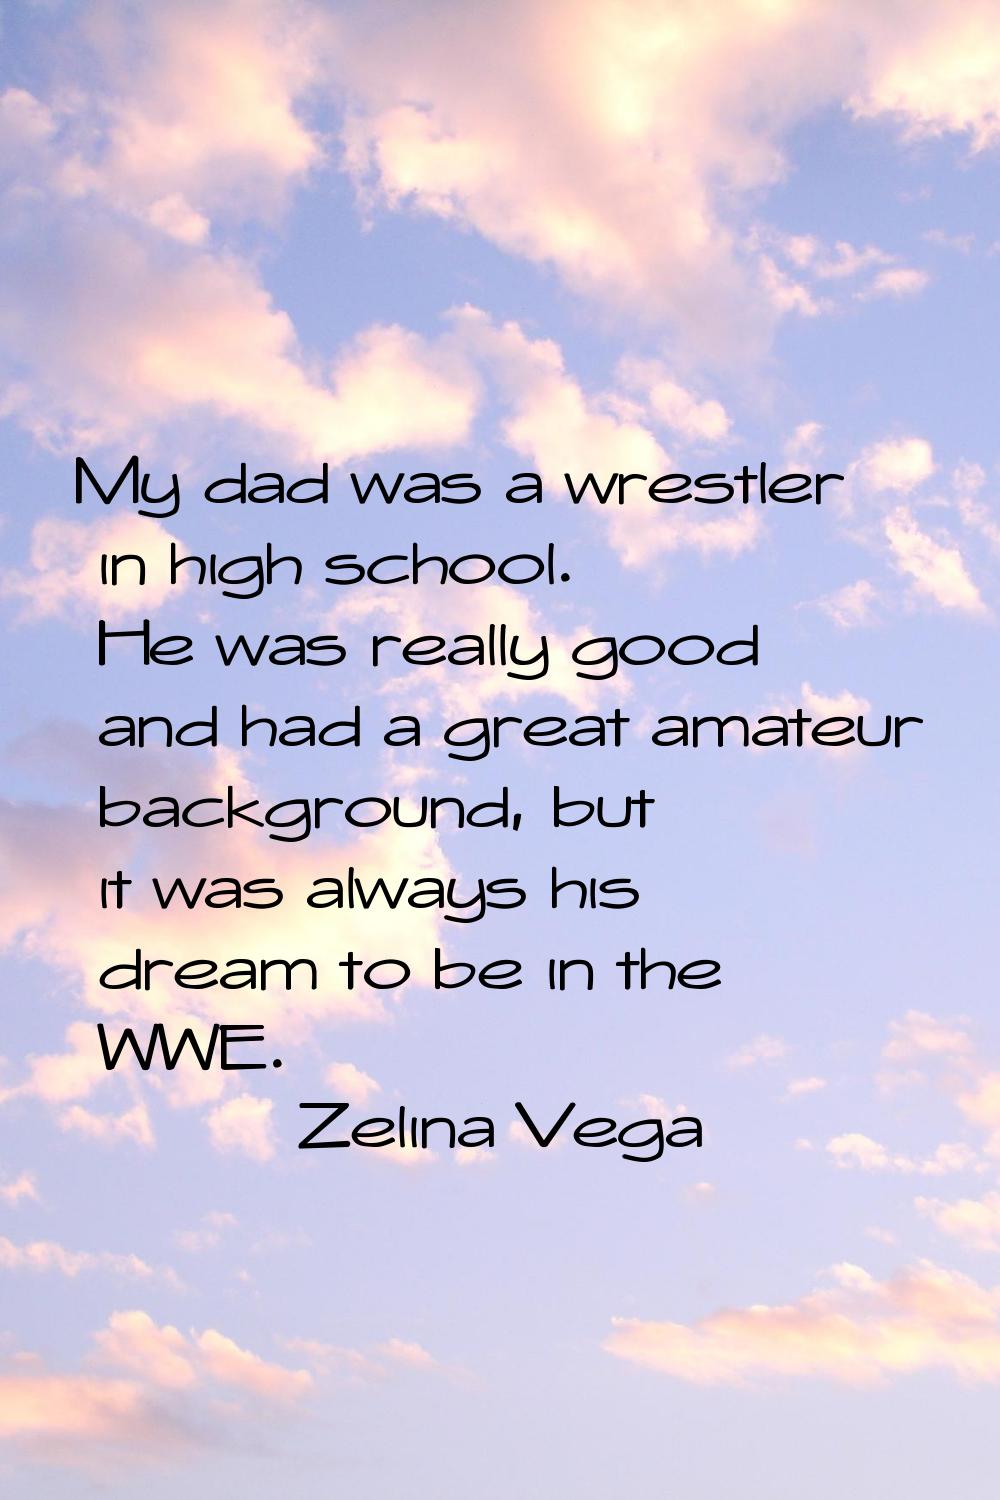 My dad was a wrestler in high school. He was really good and had a great amateur background, but it